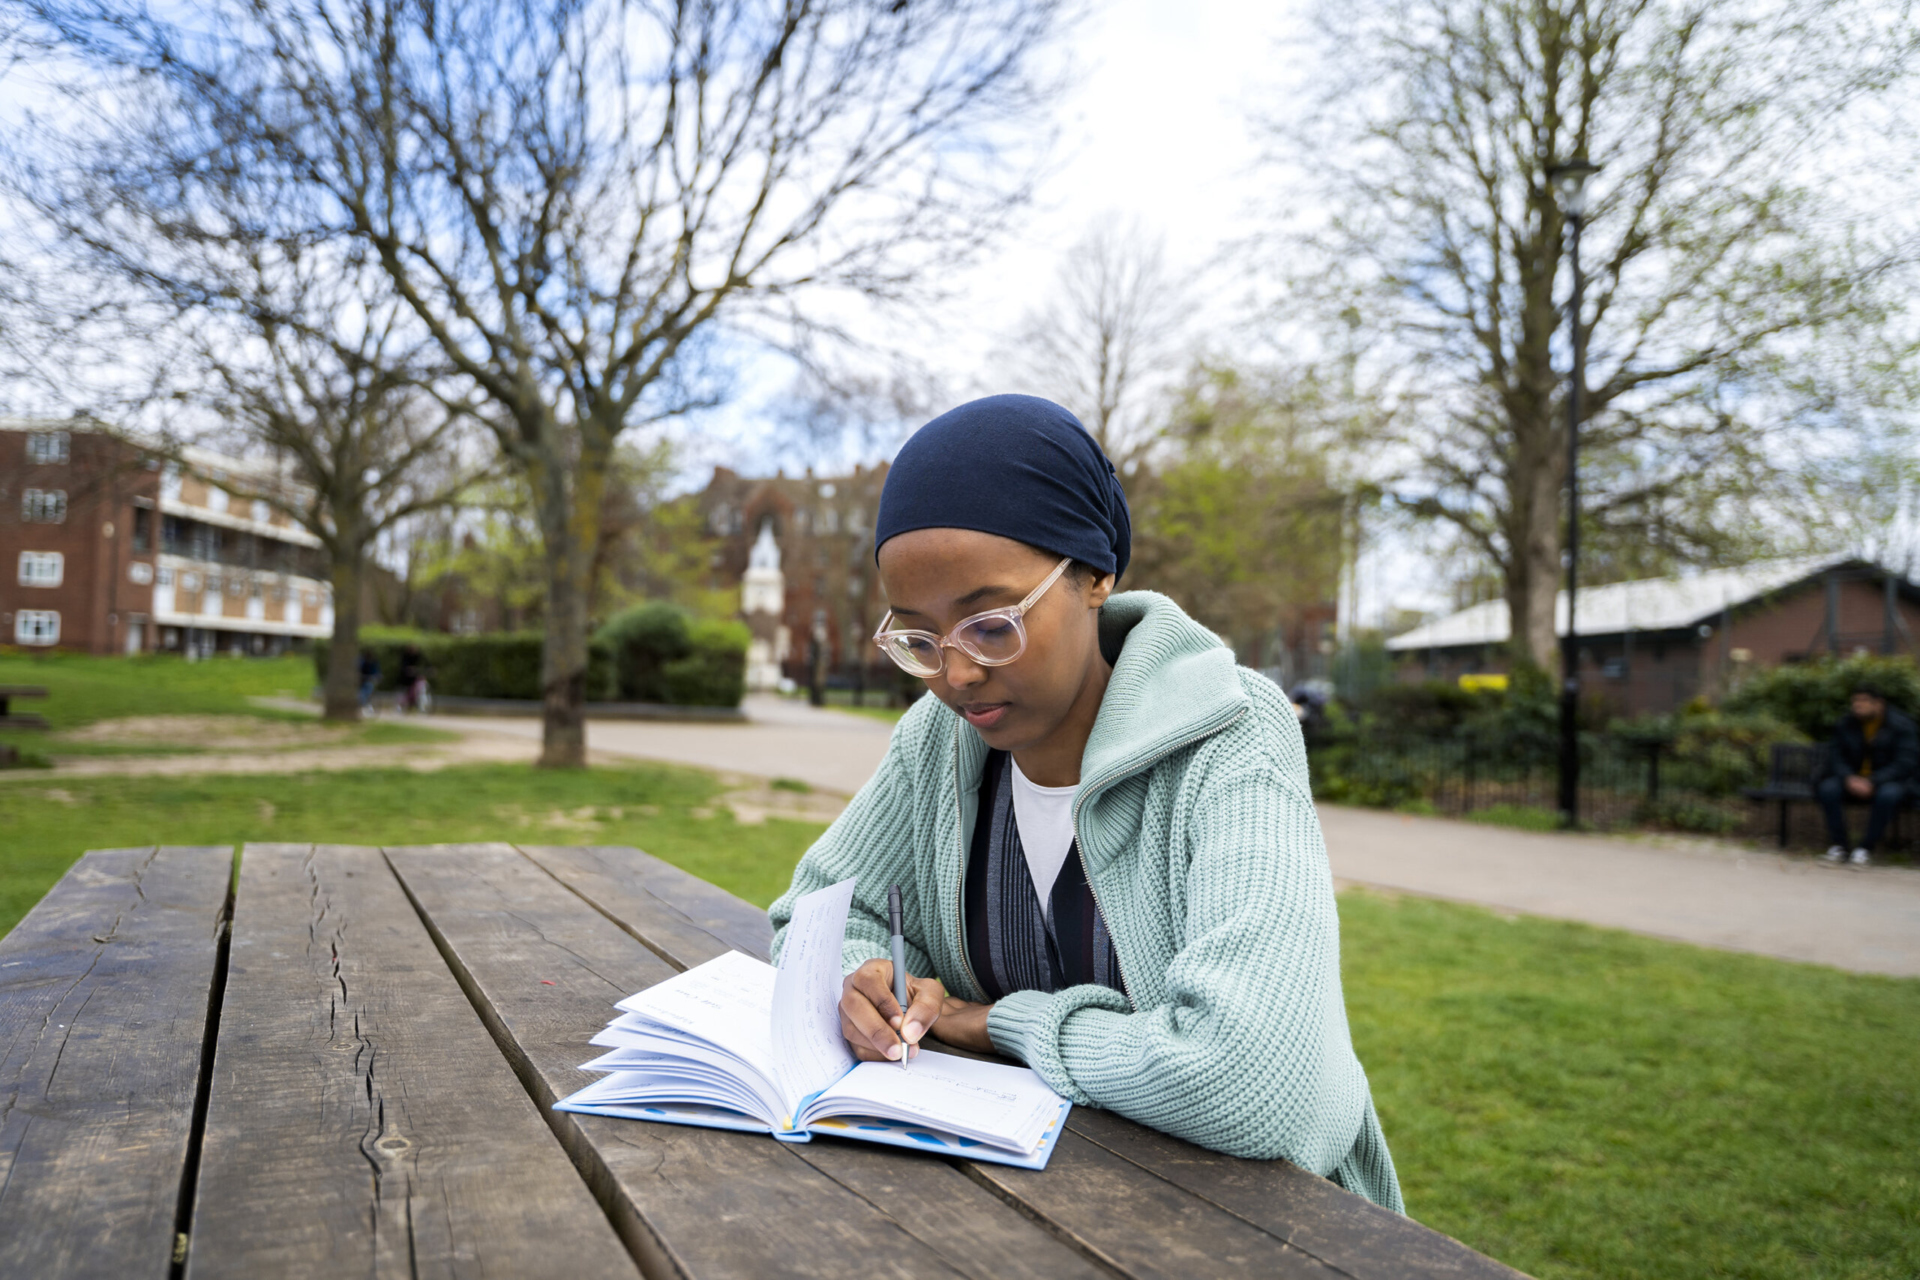 A young woman wearing a head scarf journaling while sitting at an outdoor picnic table.